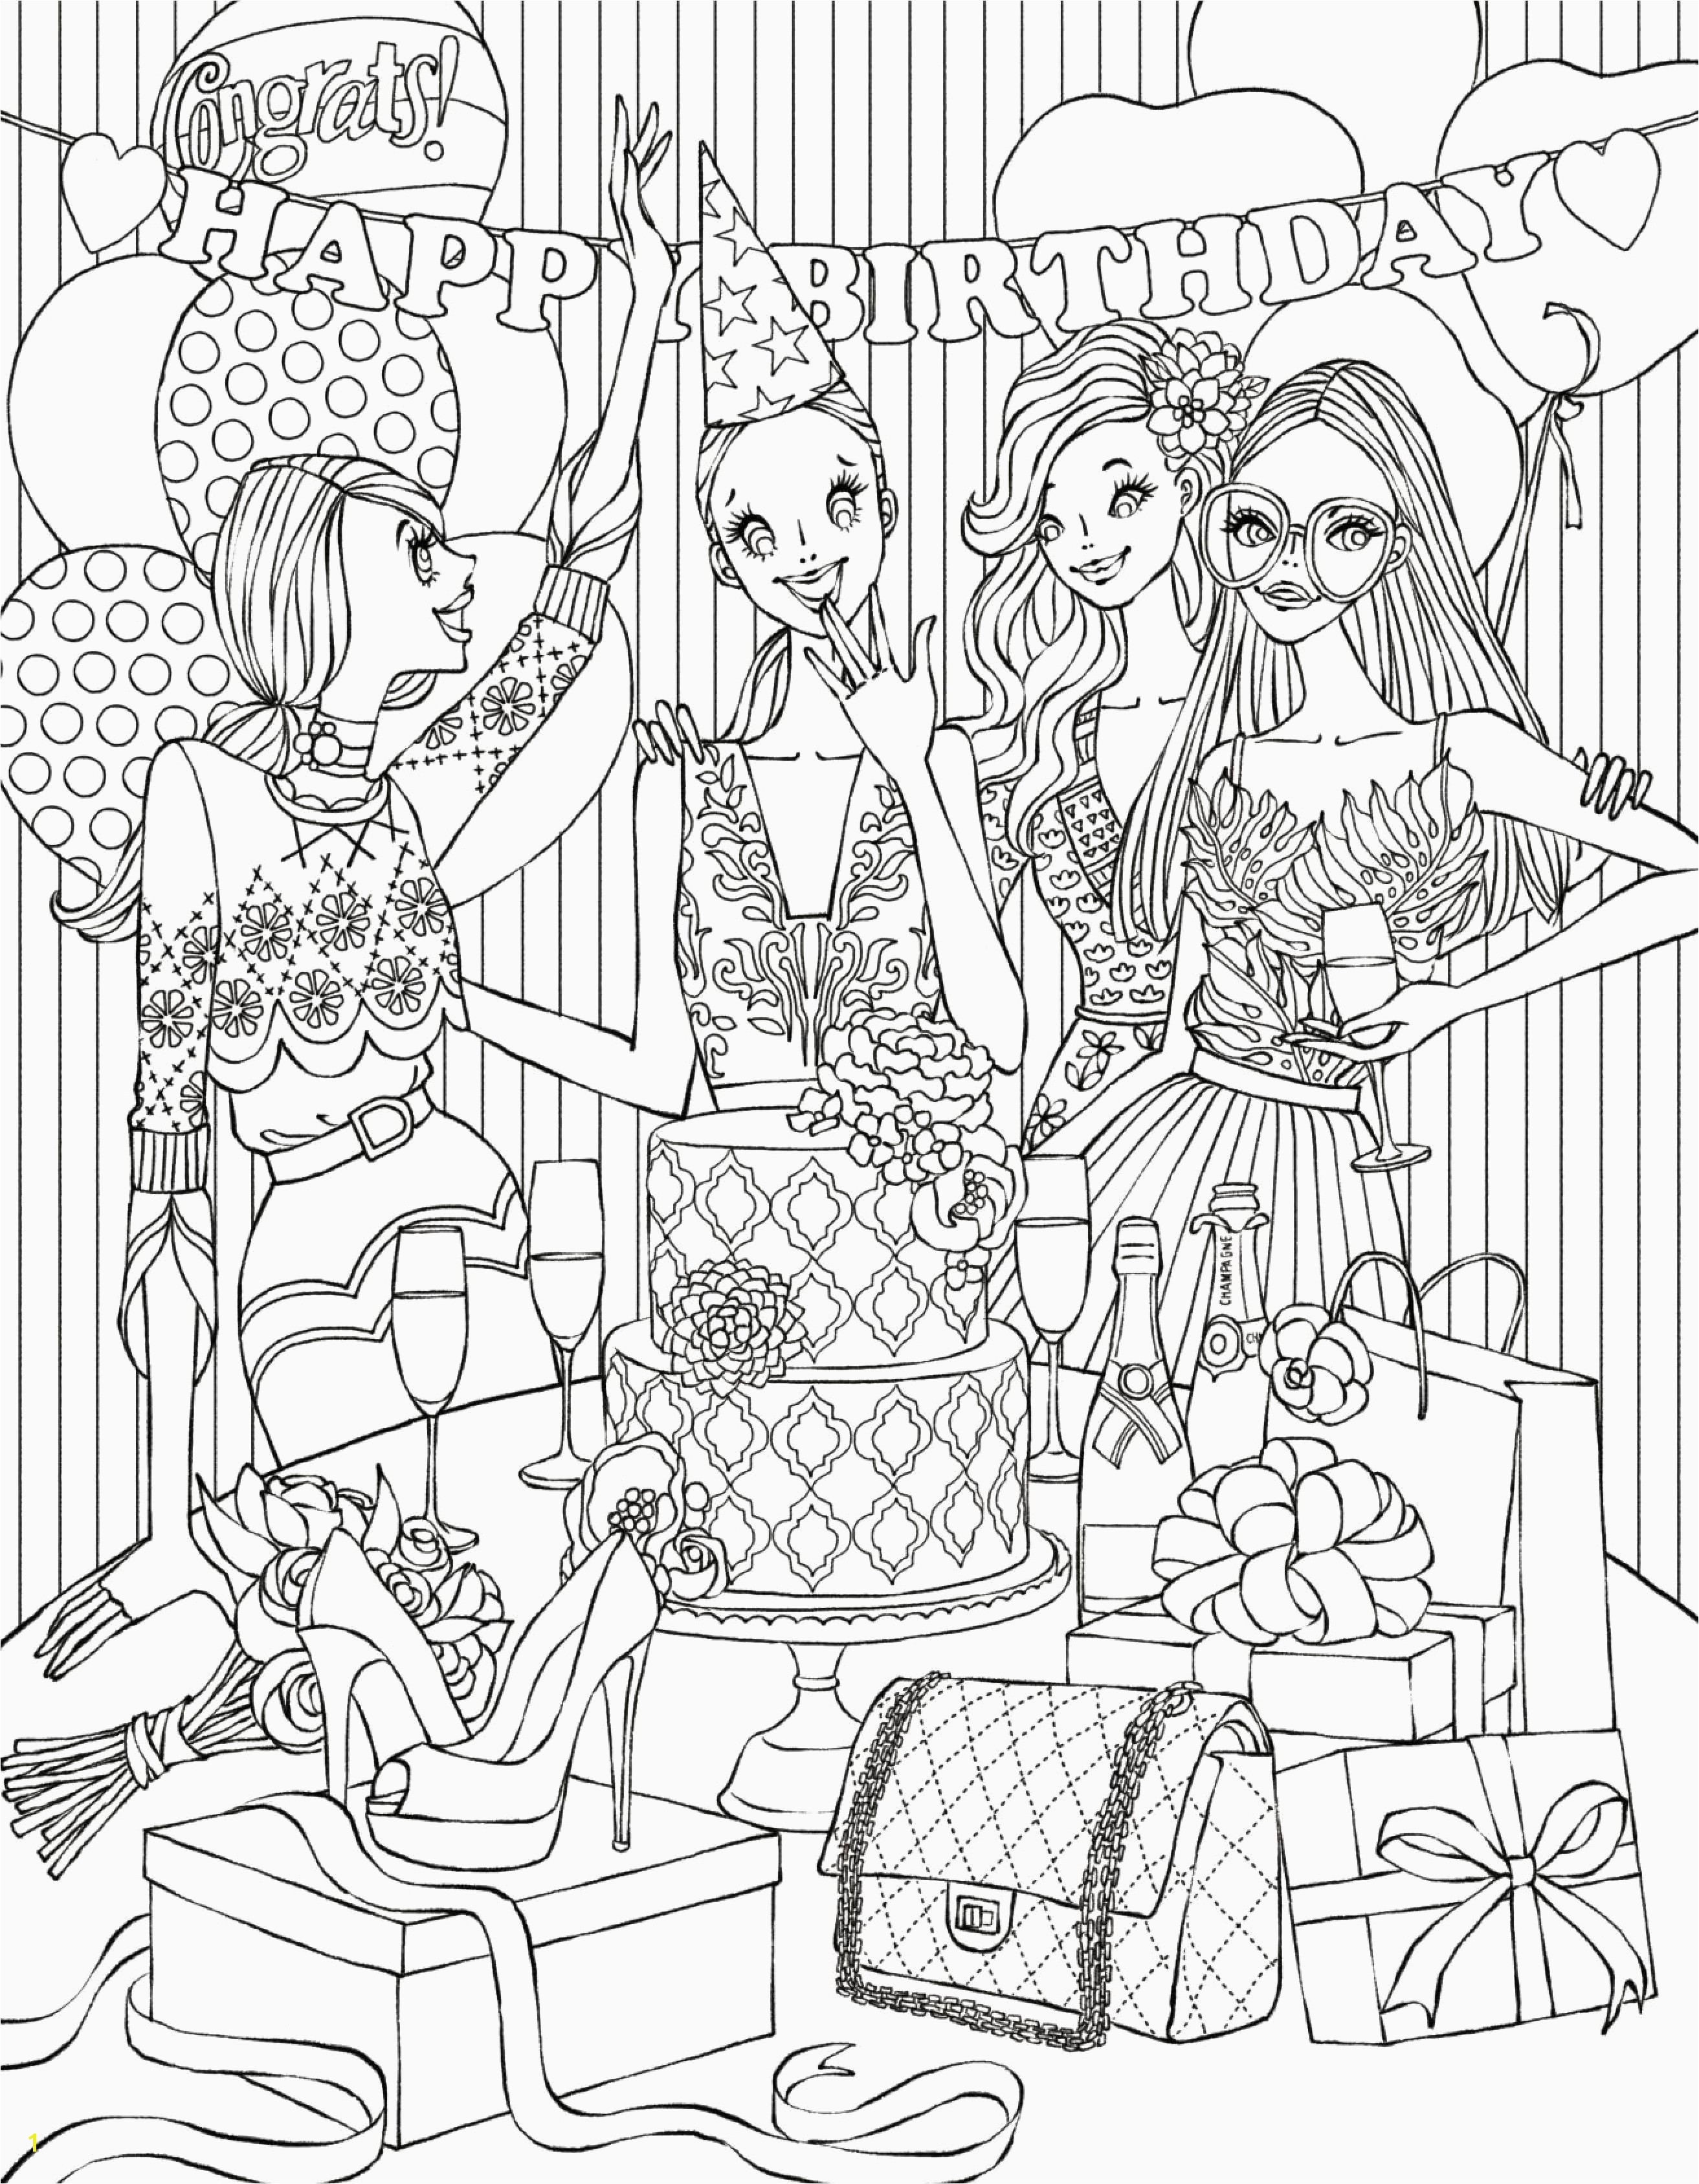 Birthday Coloring Pages to Print Birthday Coloring Book Pages Coloring Pages Coloring Book Lovely